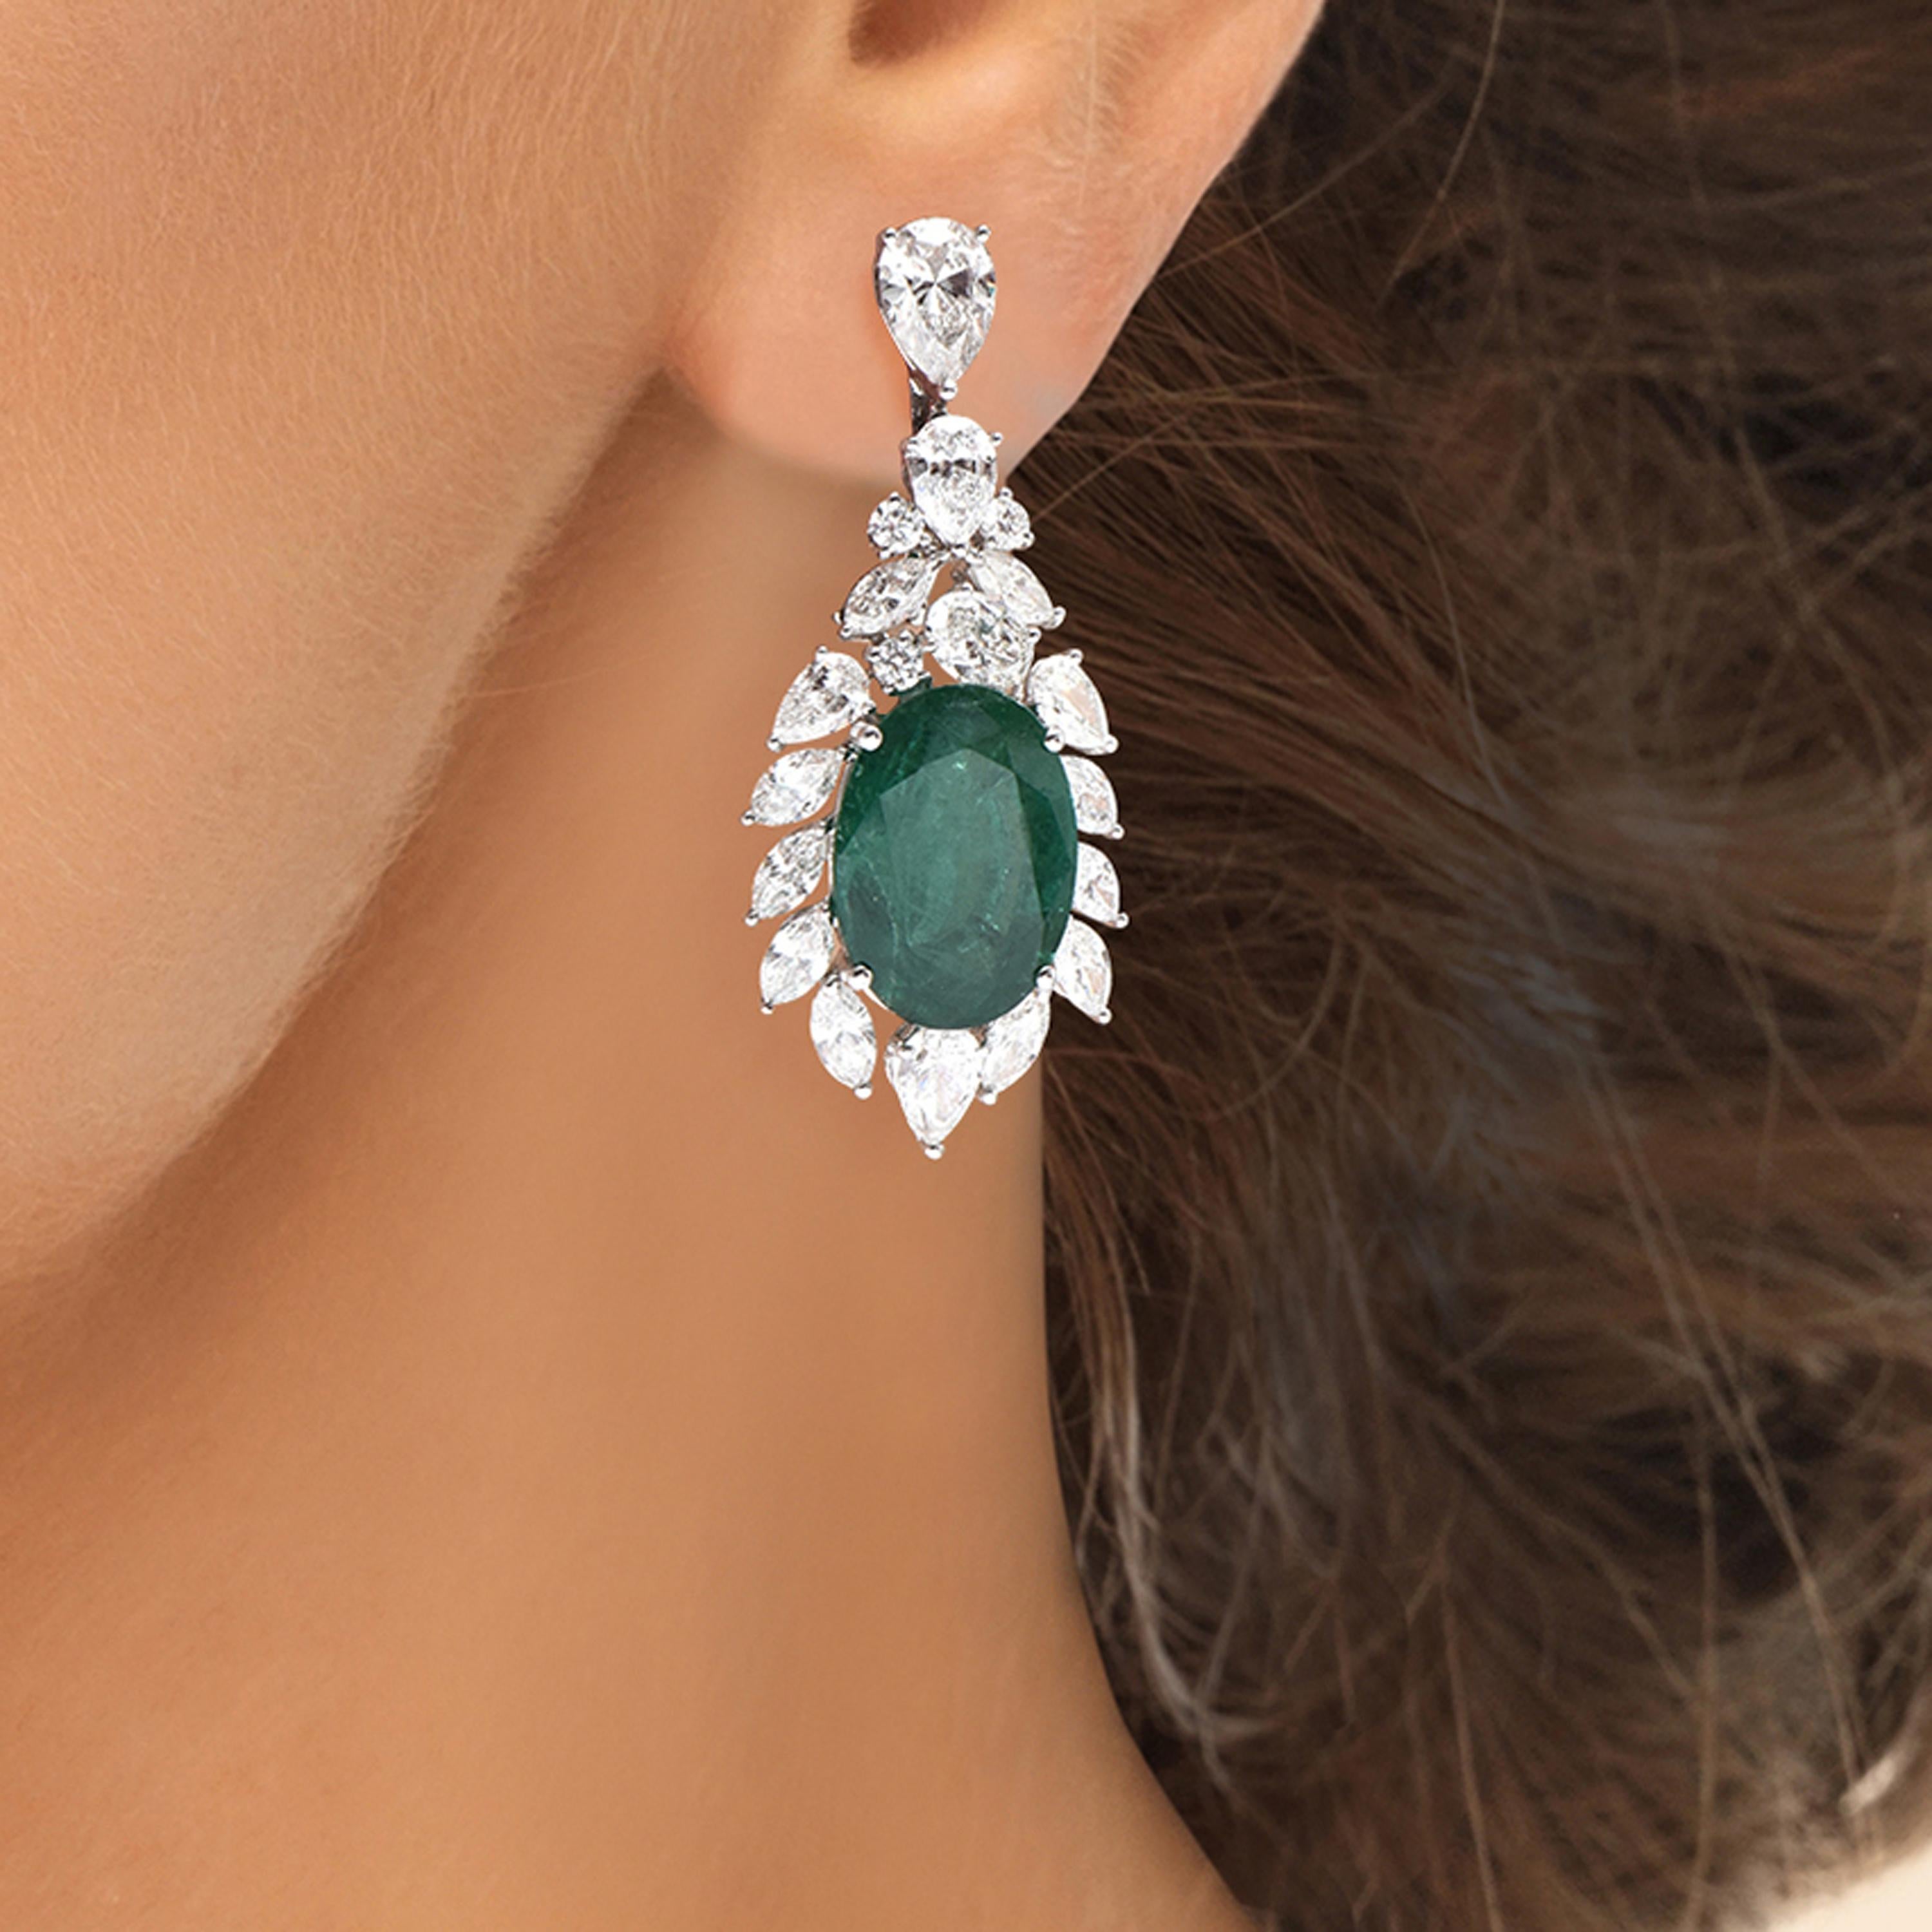 Modern Laviere 13.59 Carat Emerald and Diamond Earrings For Sale